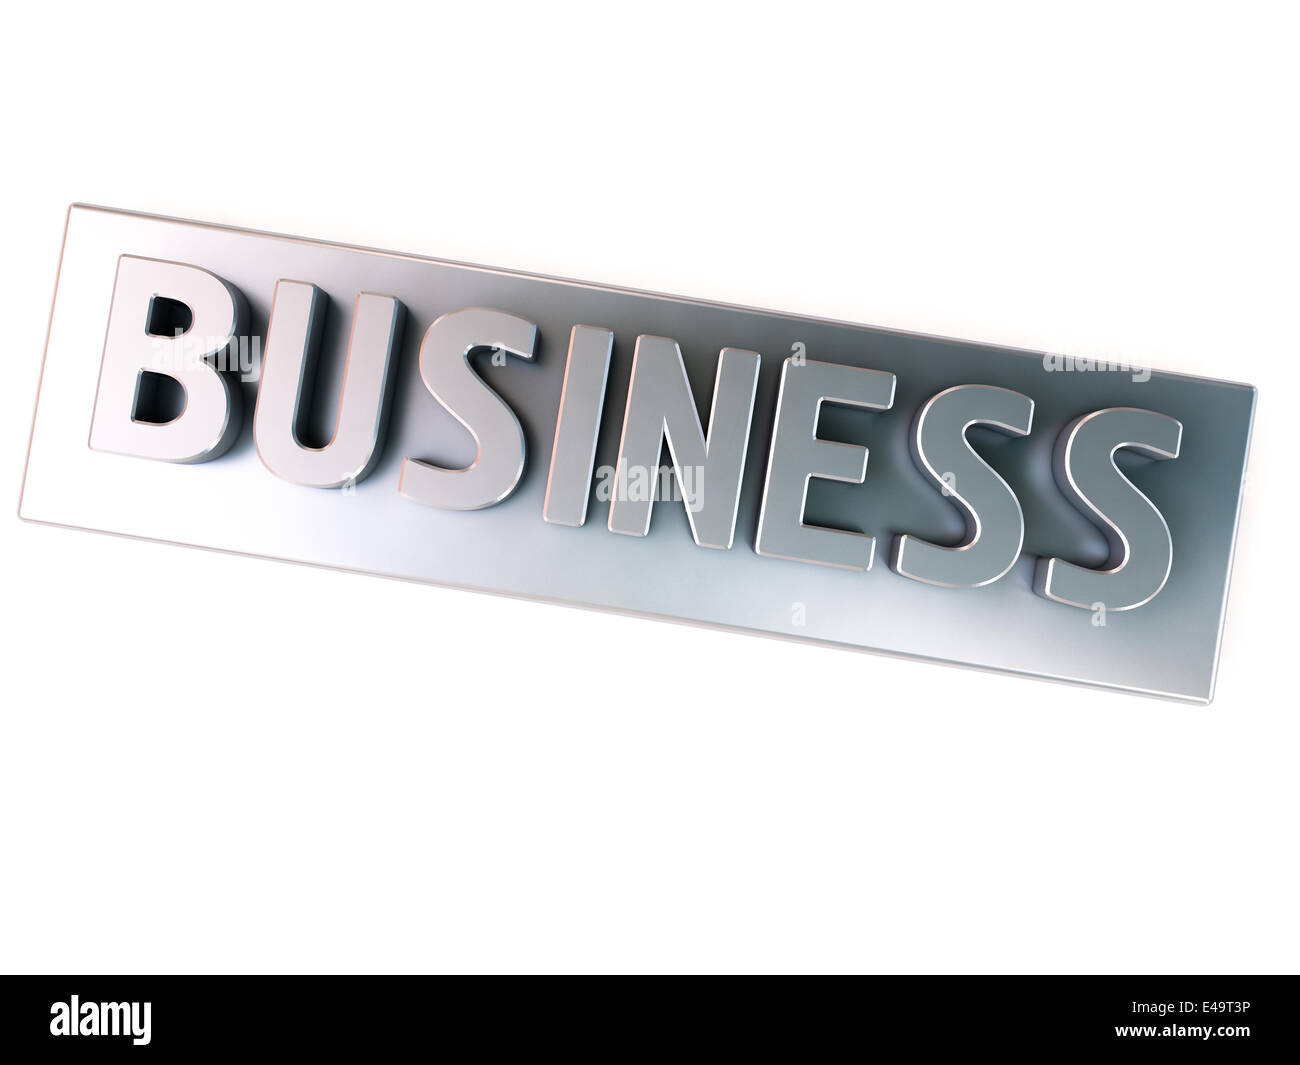 Business, metal letters Stock Photo